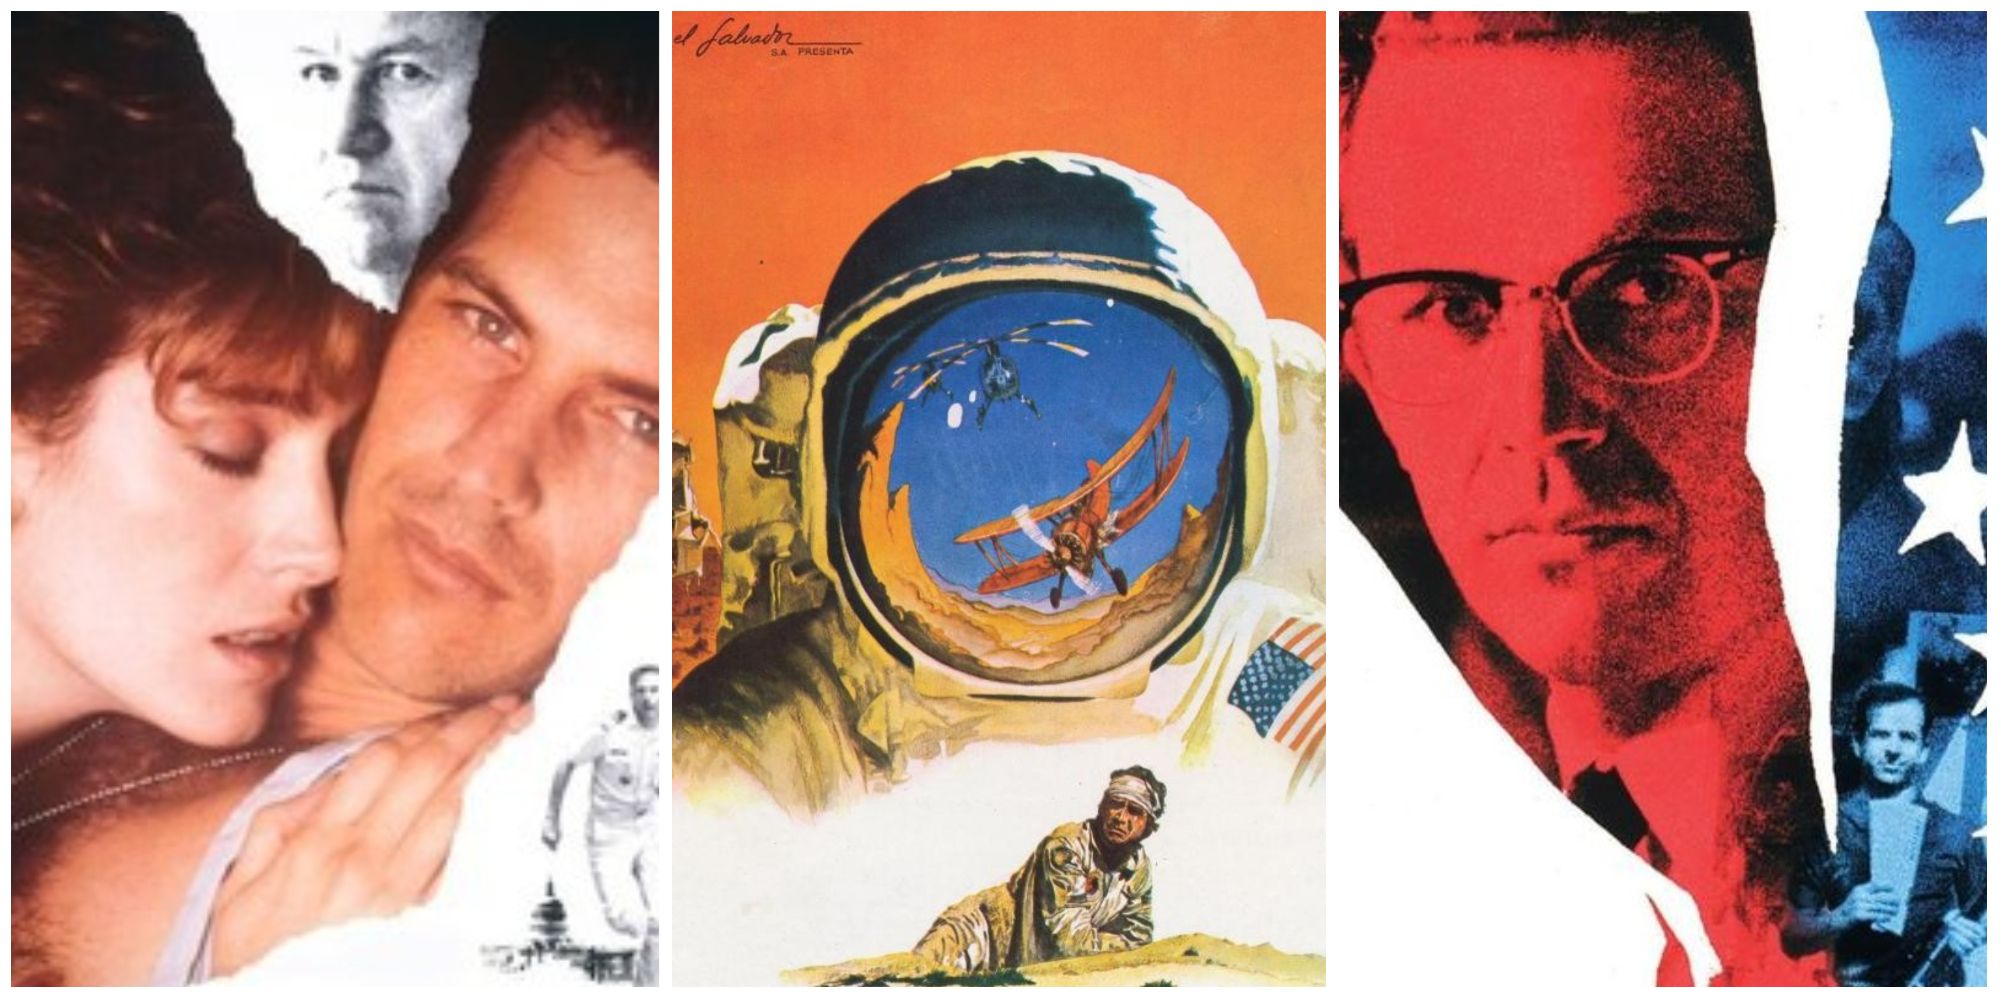 Greatest Conspiracy Thrillers No Way Out Capricorn One JFK